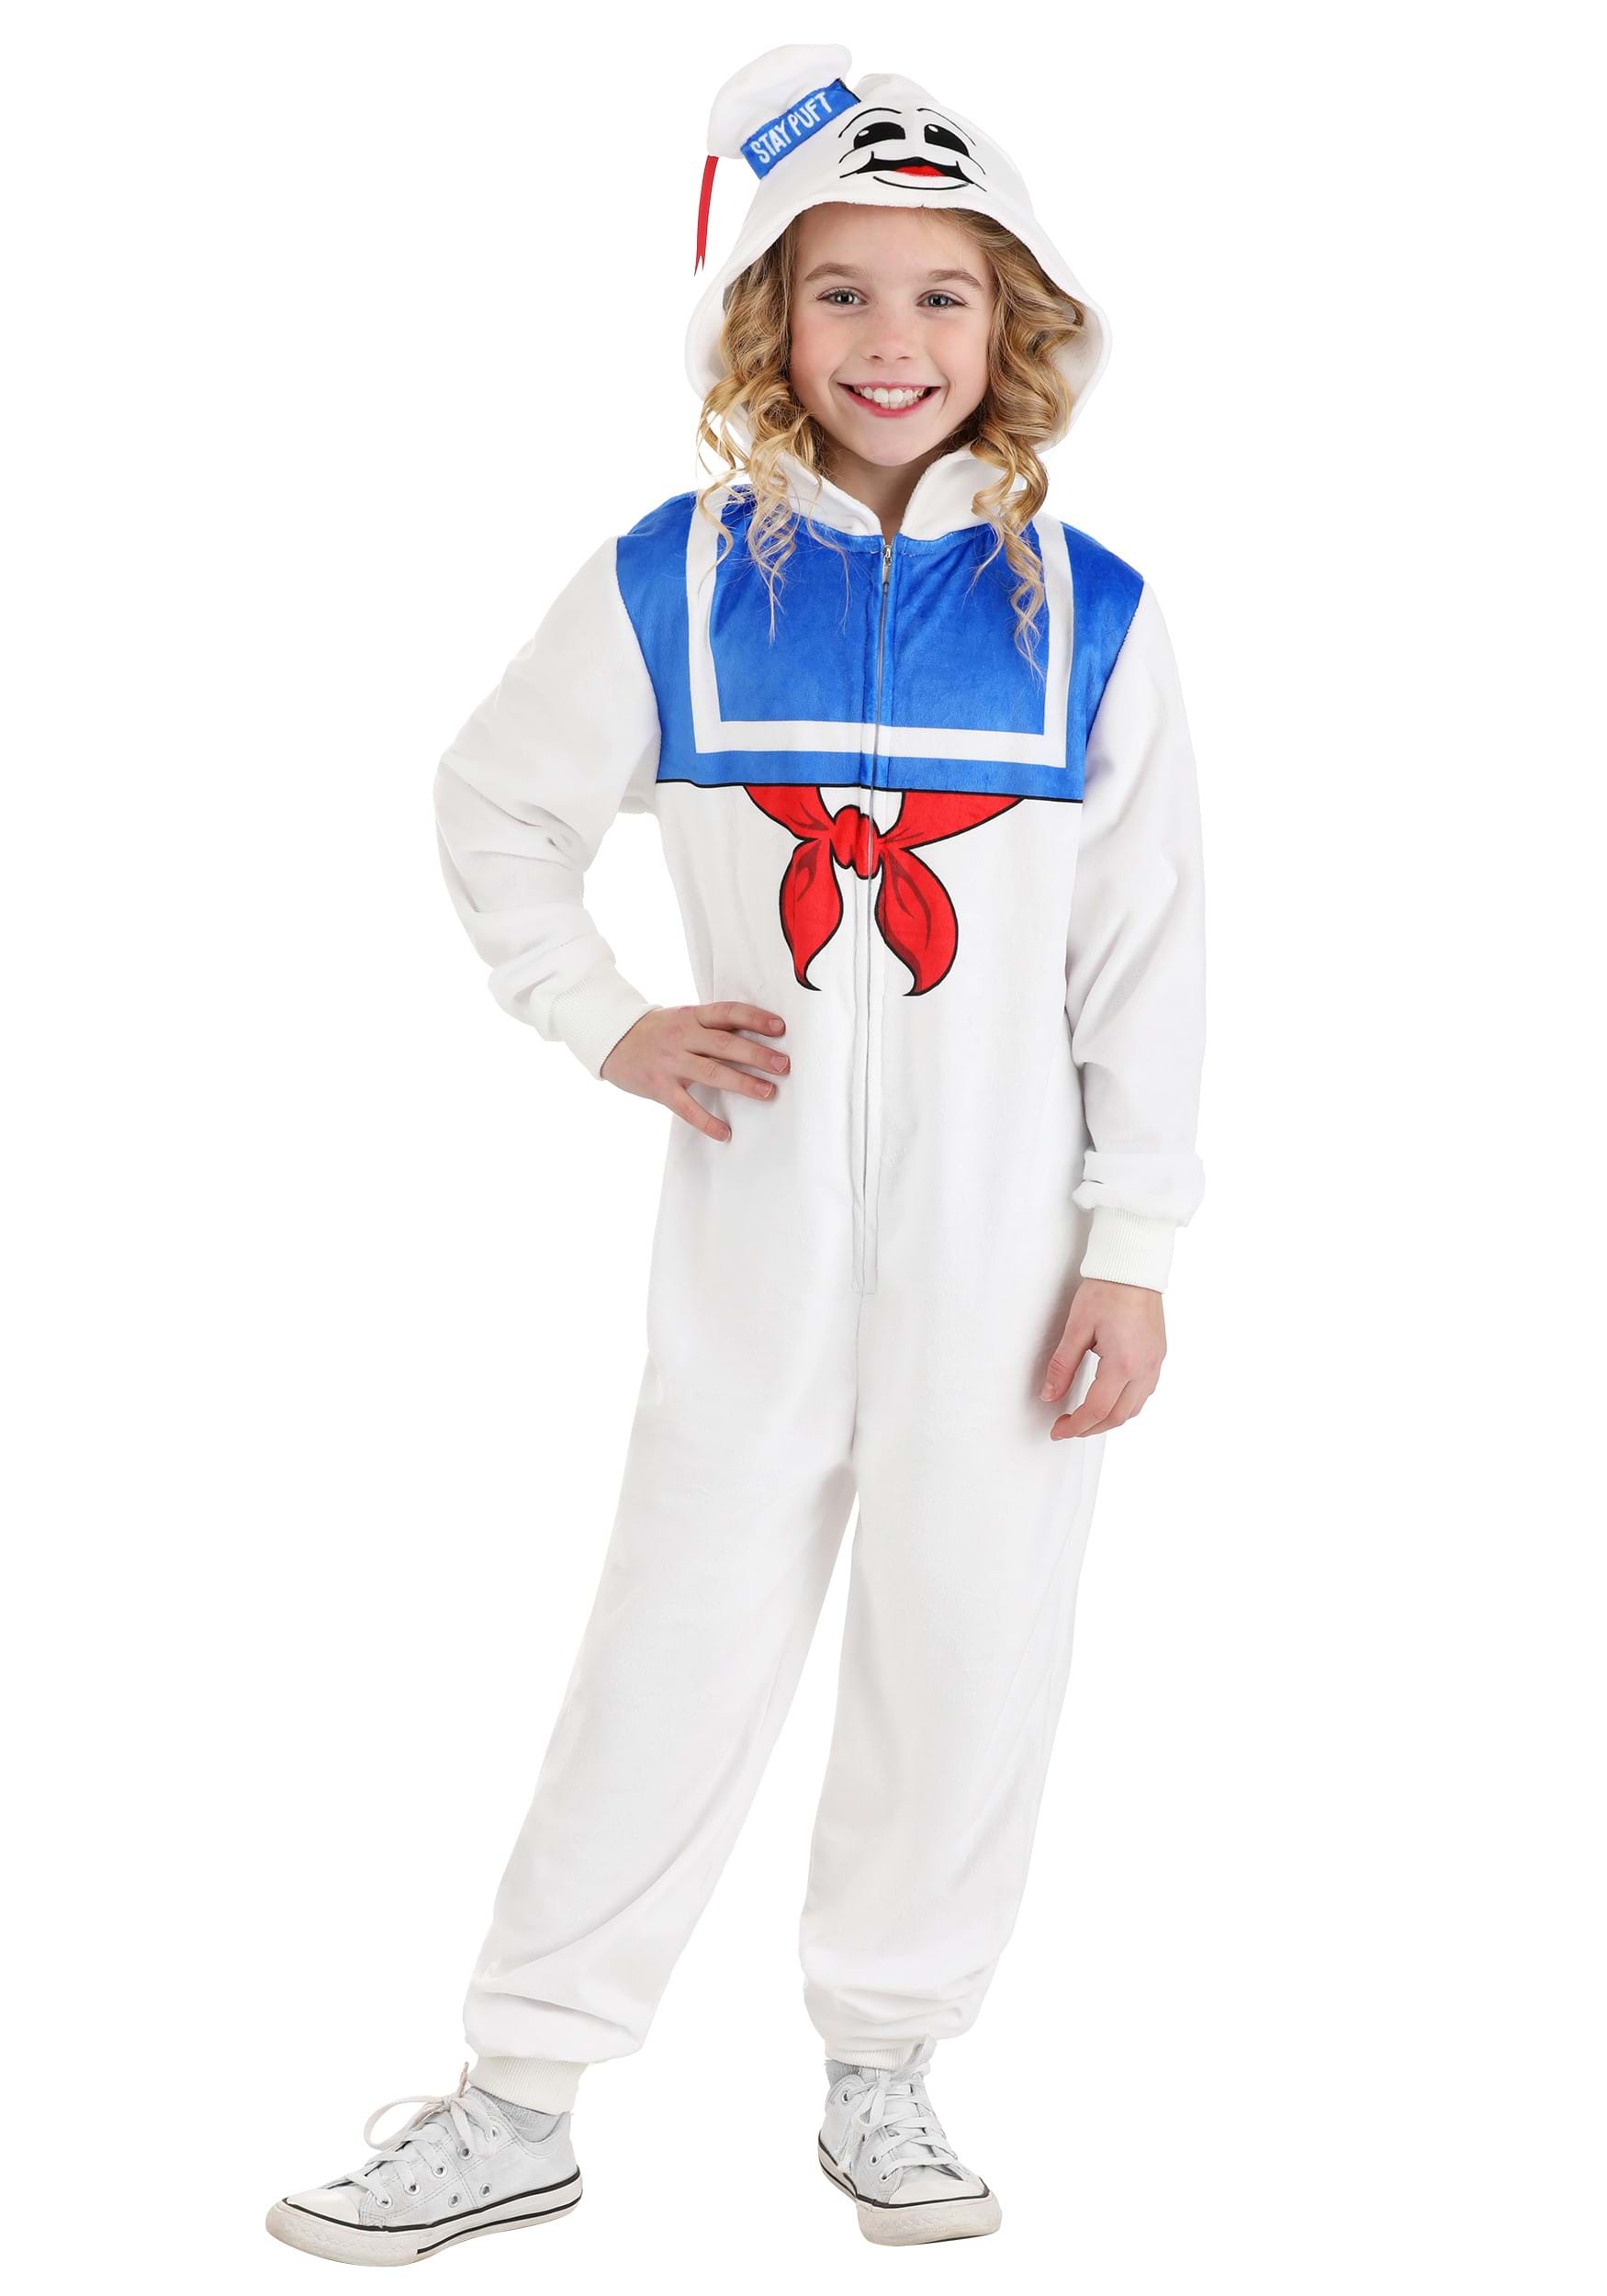 Photos - Fancy Dress Stay FUN Costumes  Puft Marshmallow Man Costume Onesie for Kids Blue/Re 